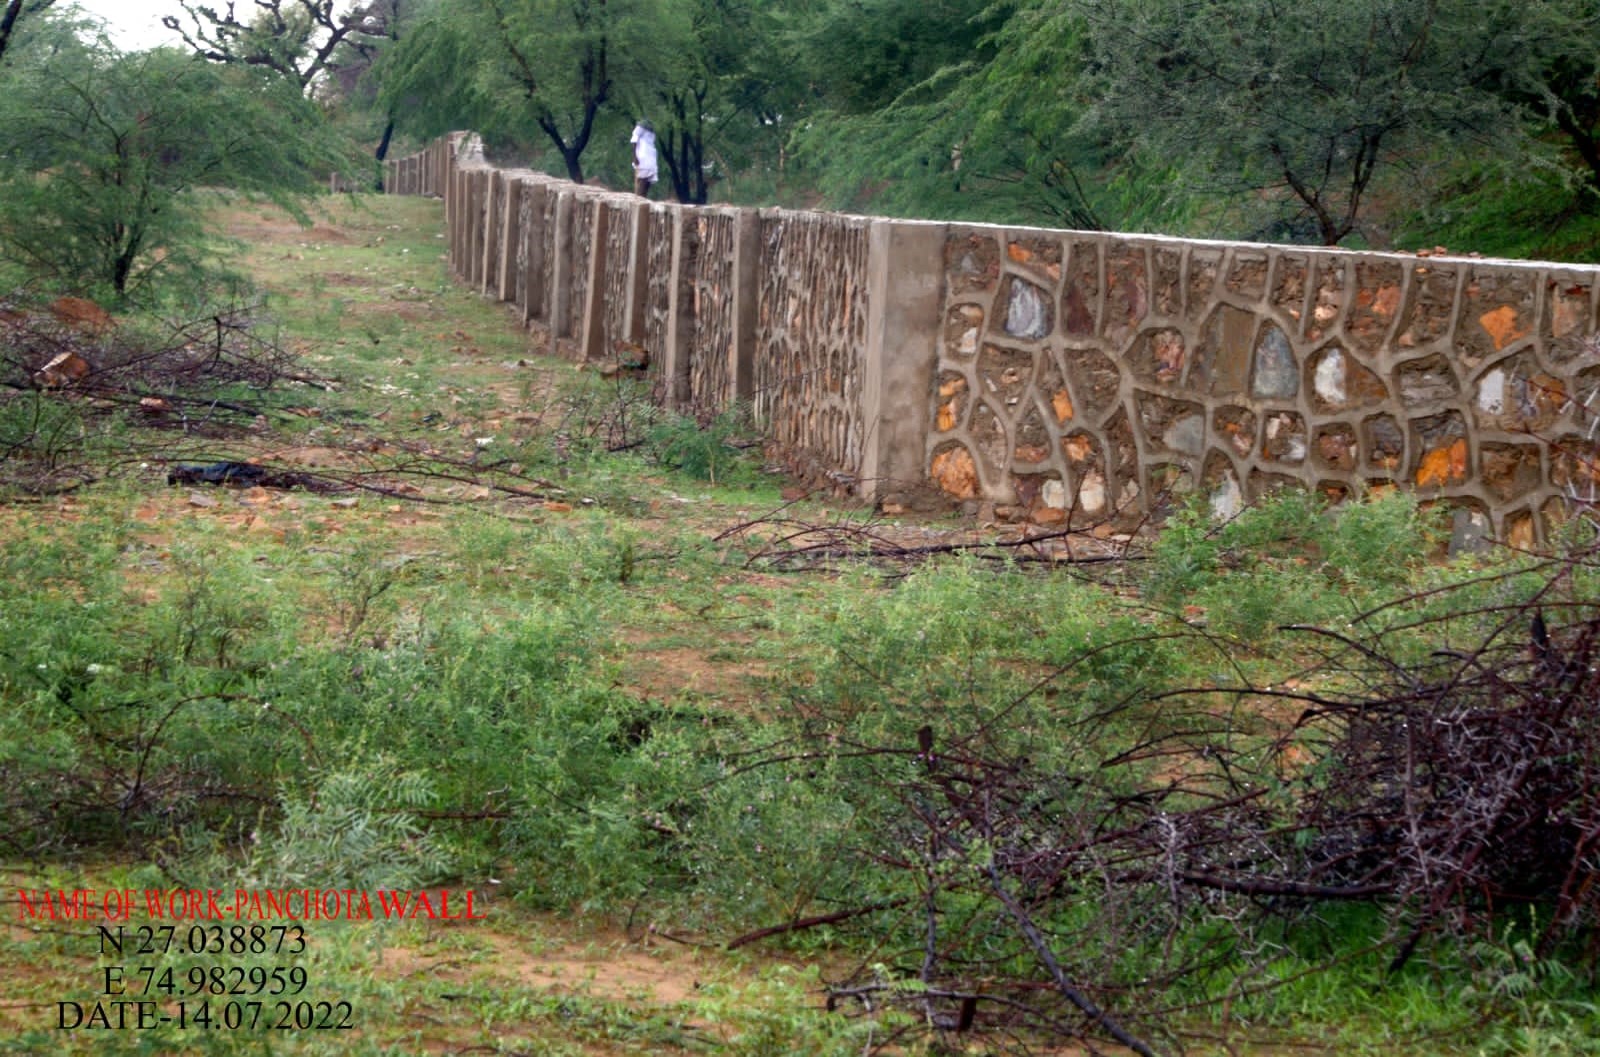 Eco-restoration pucca wall 4’ height at Panchota in Nagaur DivisionPicture%208.jpg